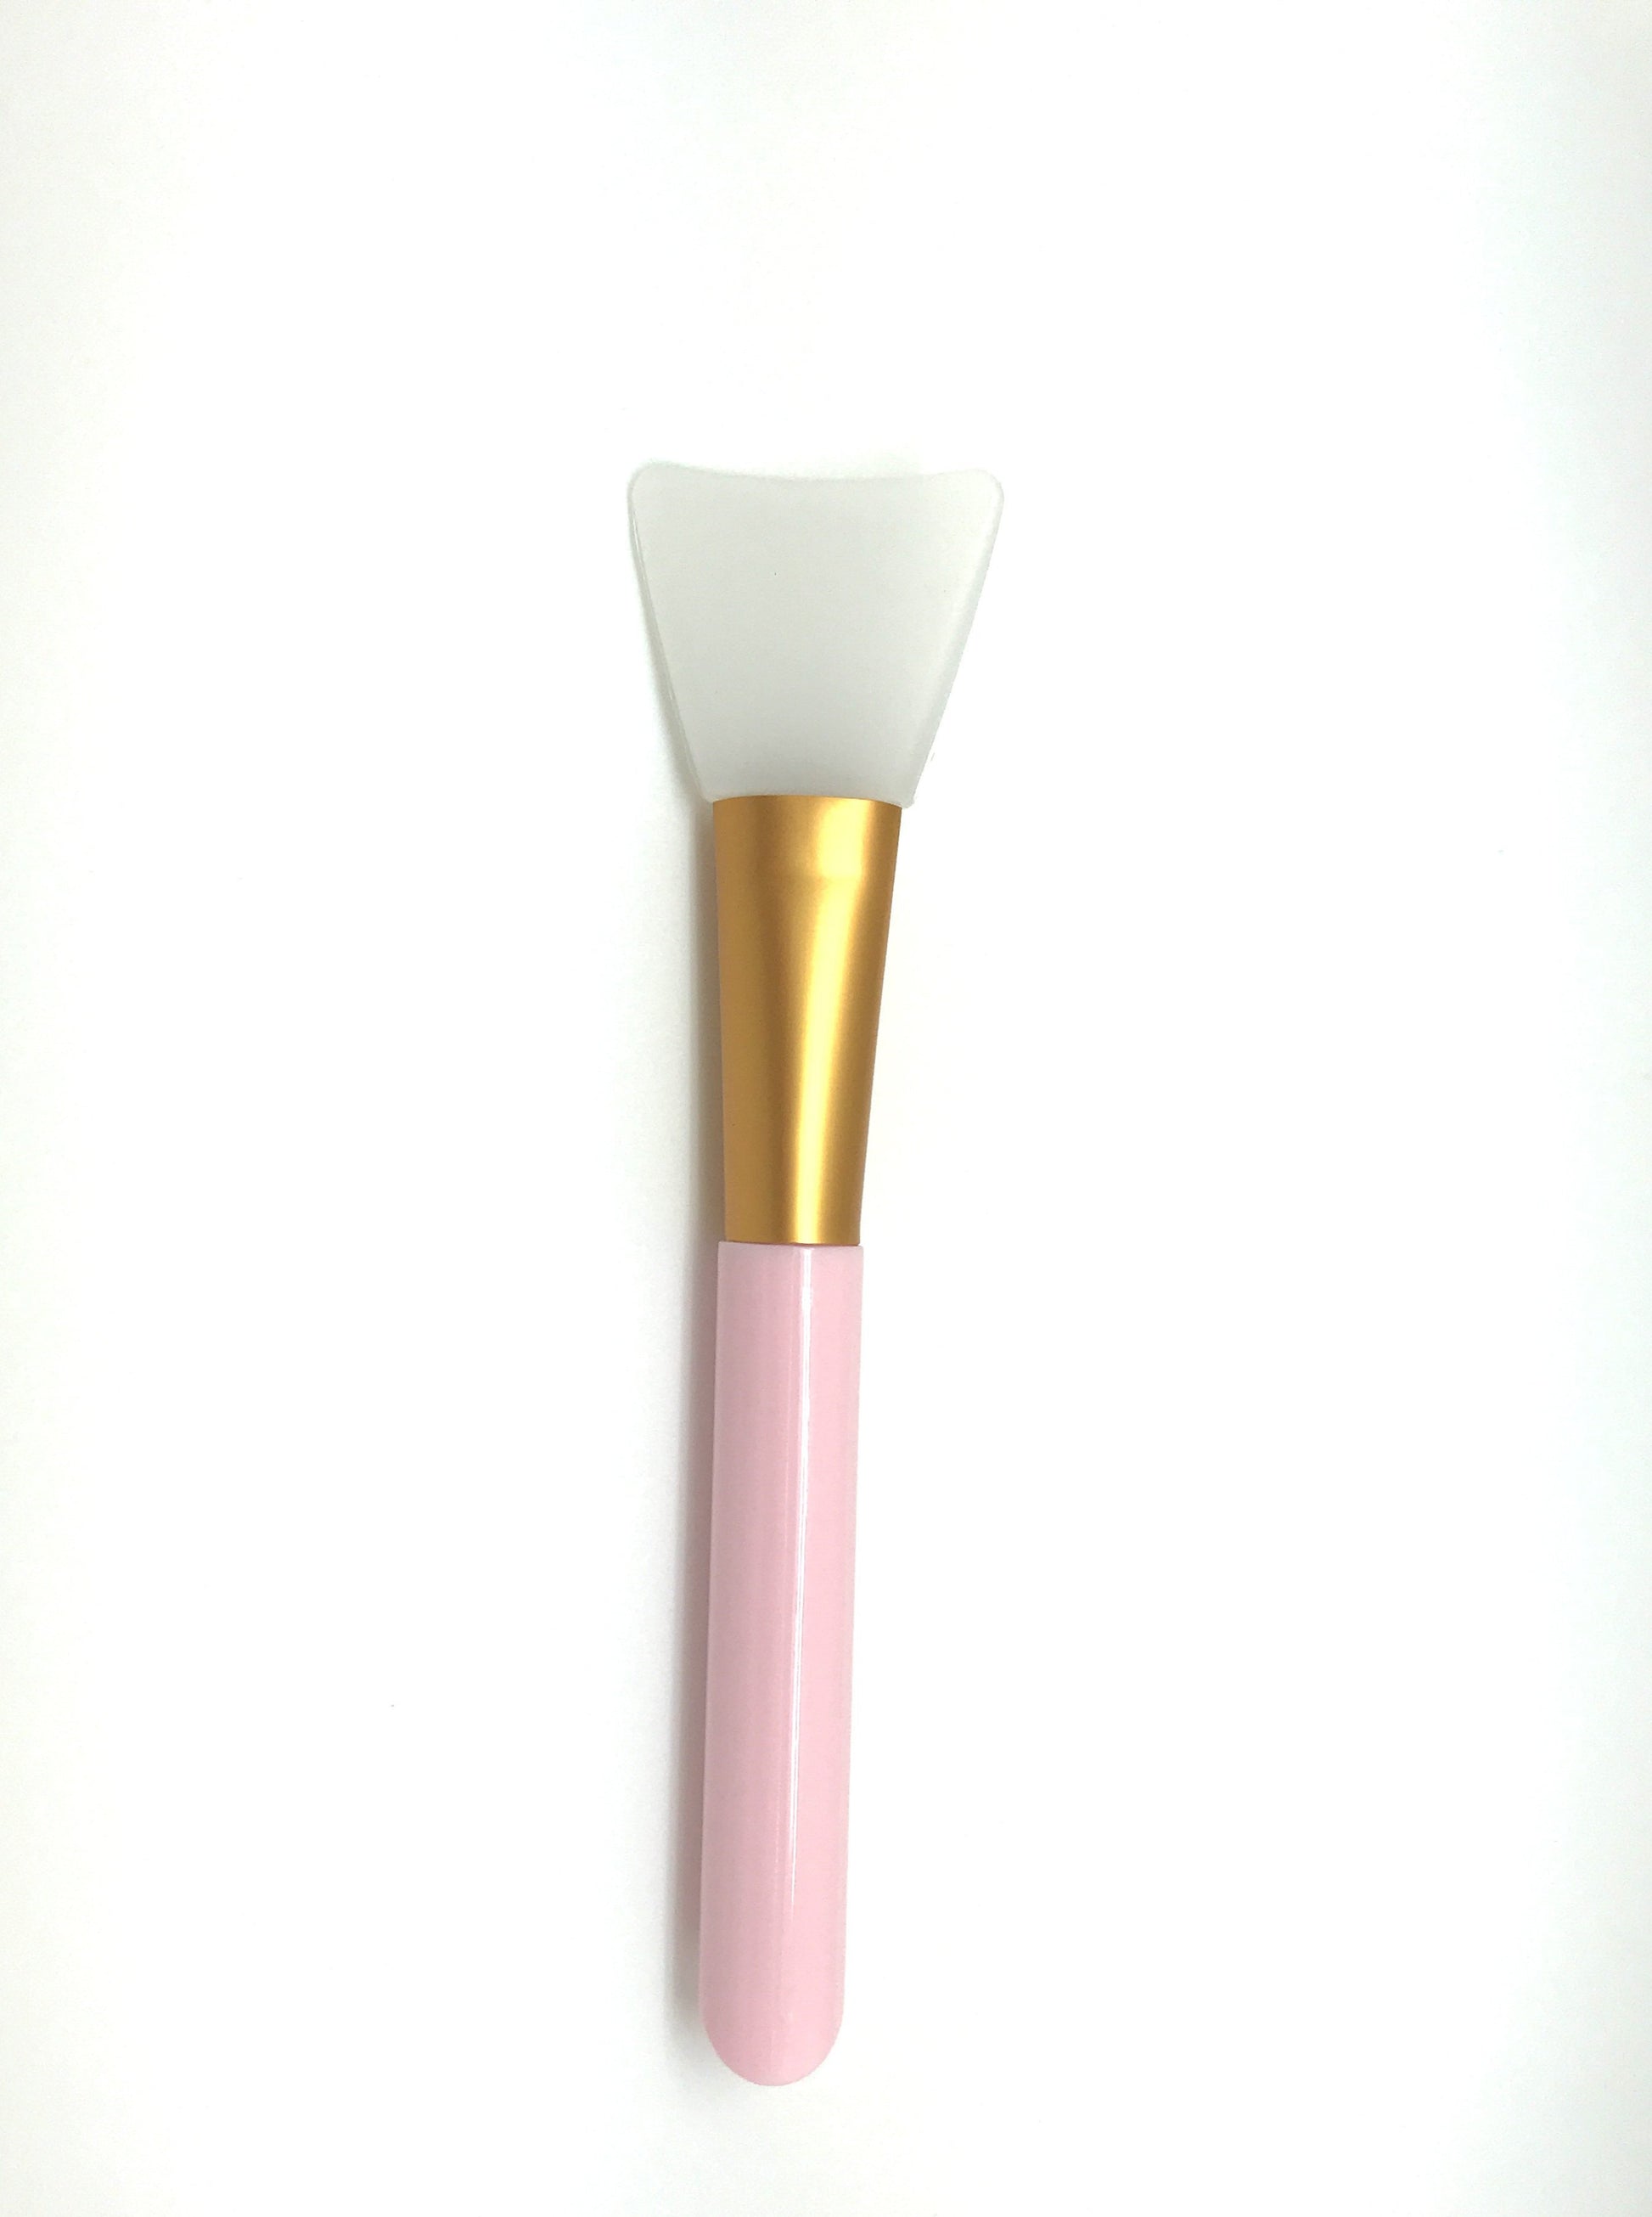 Silicone Facial Mask Brush - Go See Christy Beauty 